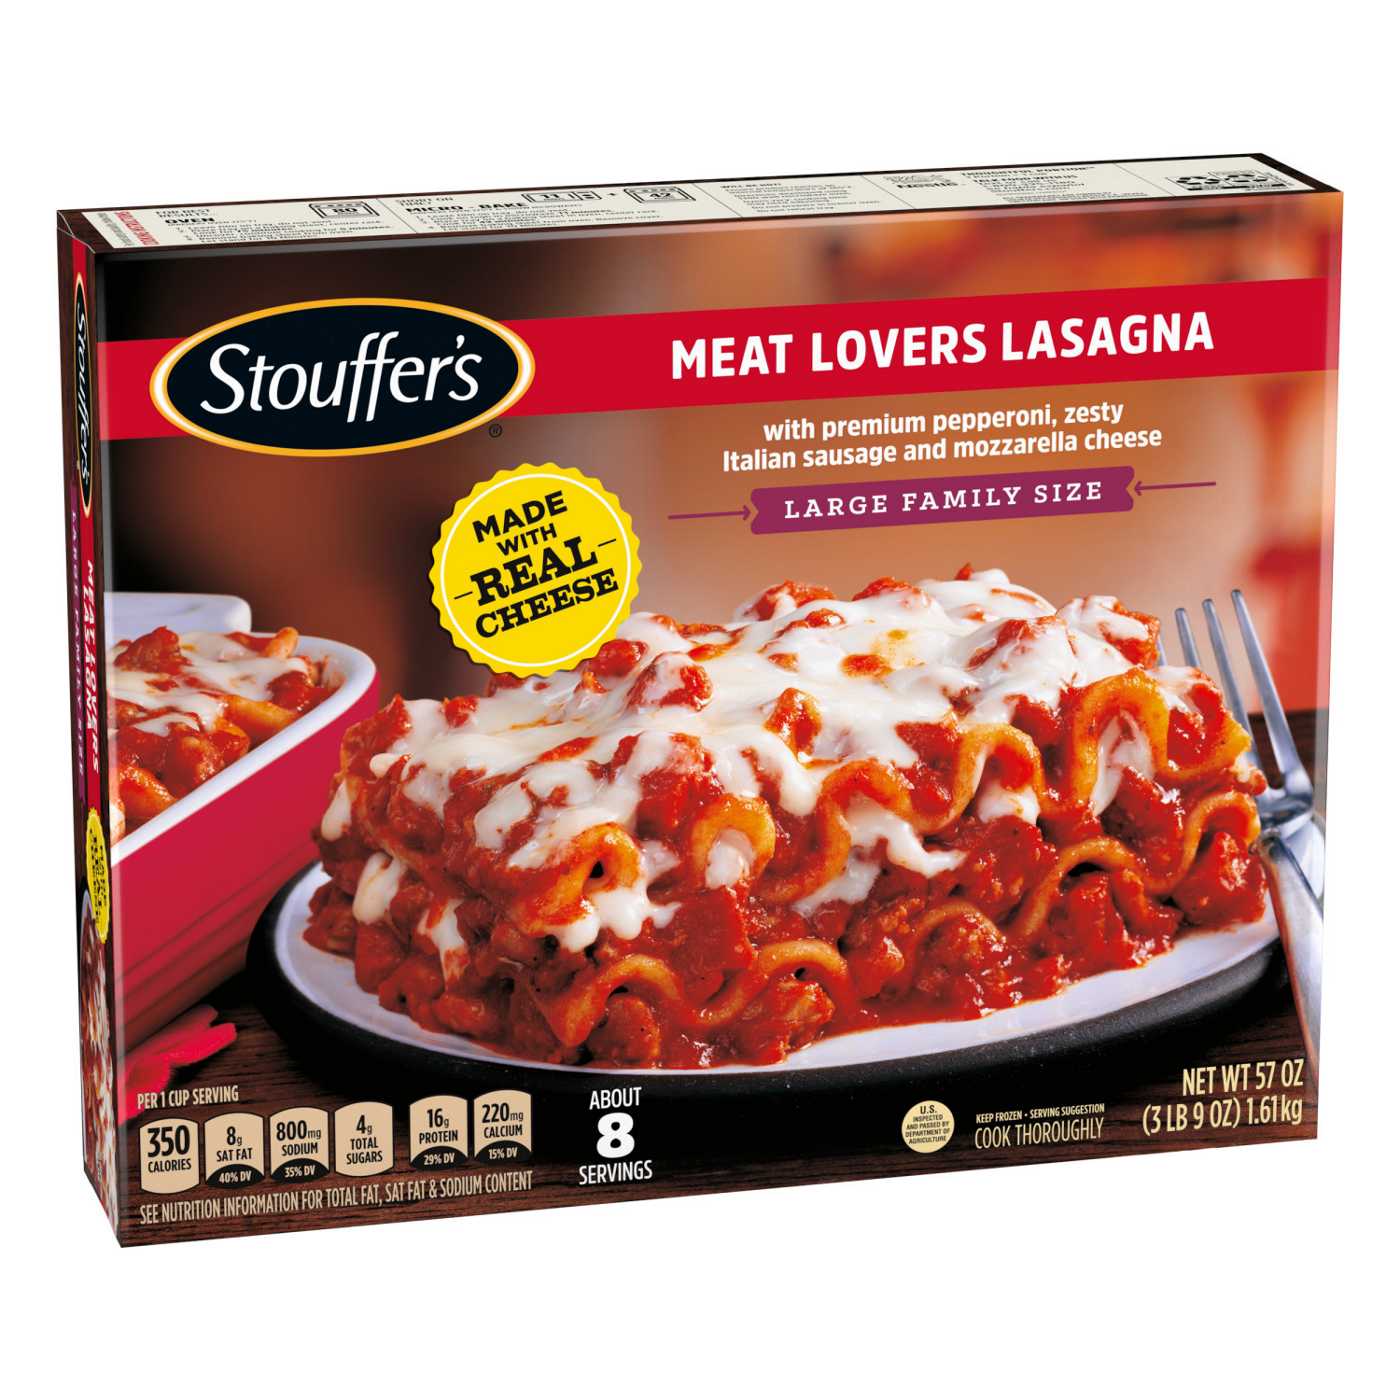 Stouffer's Frozen Meat Lovers Lasagna - Large Family Size; image 2 of 4